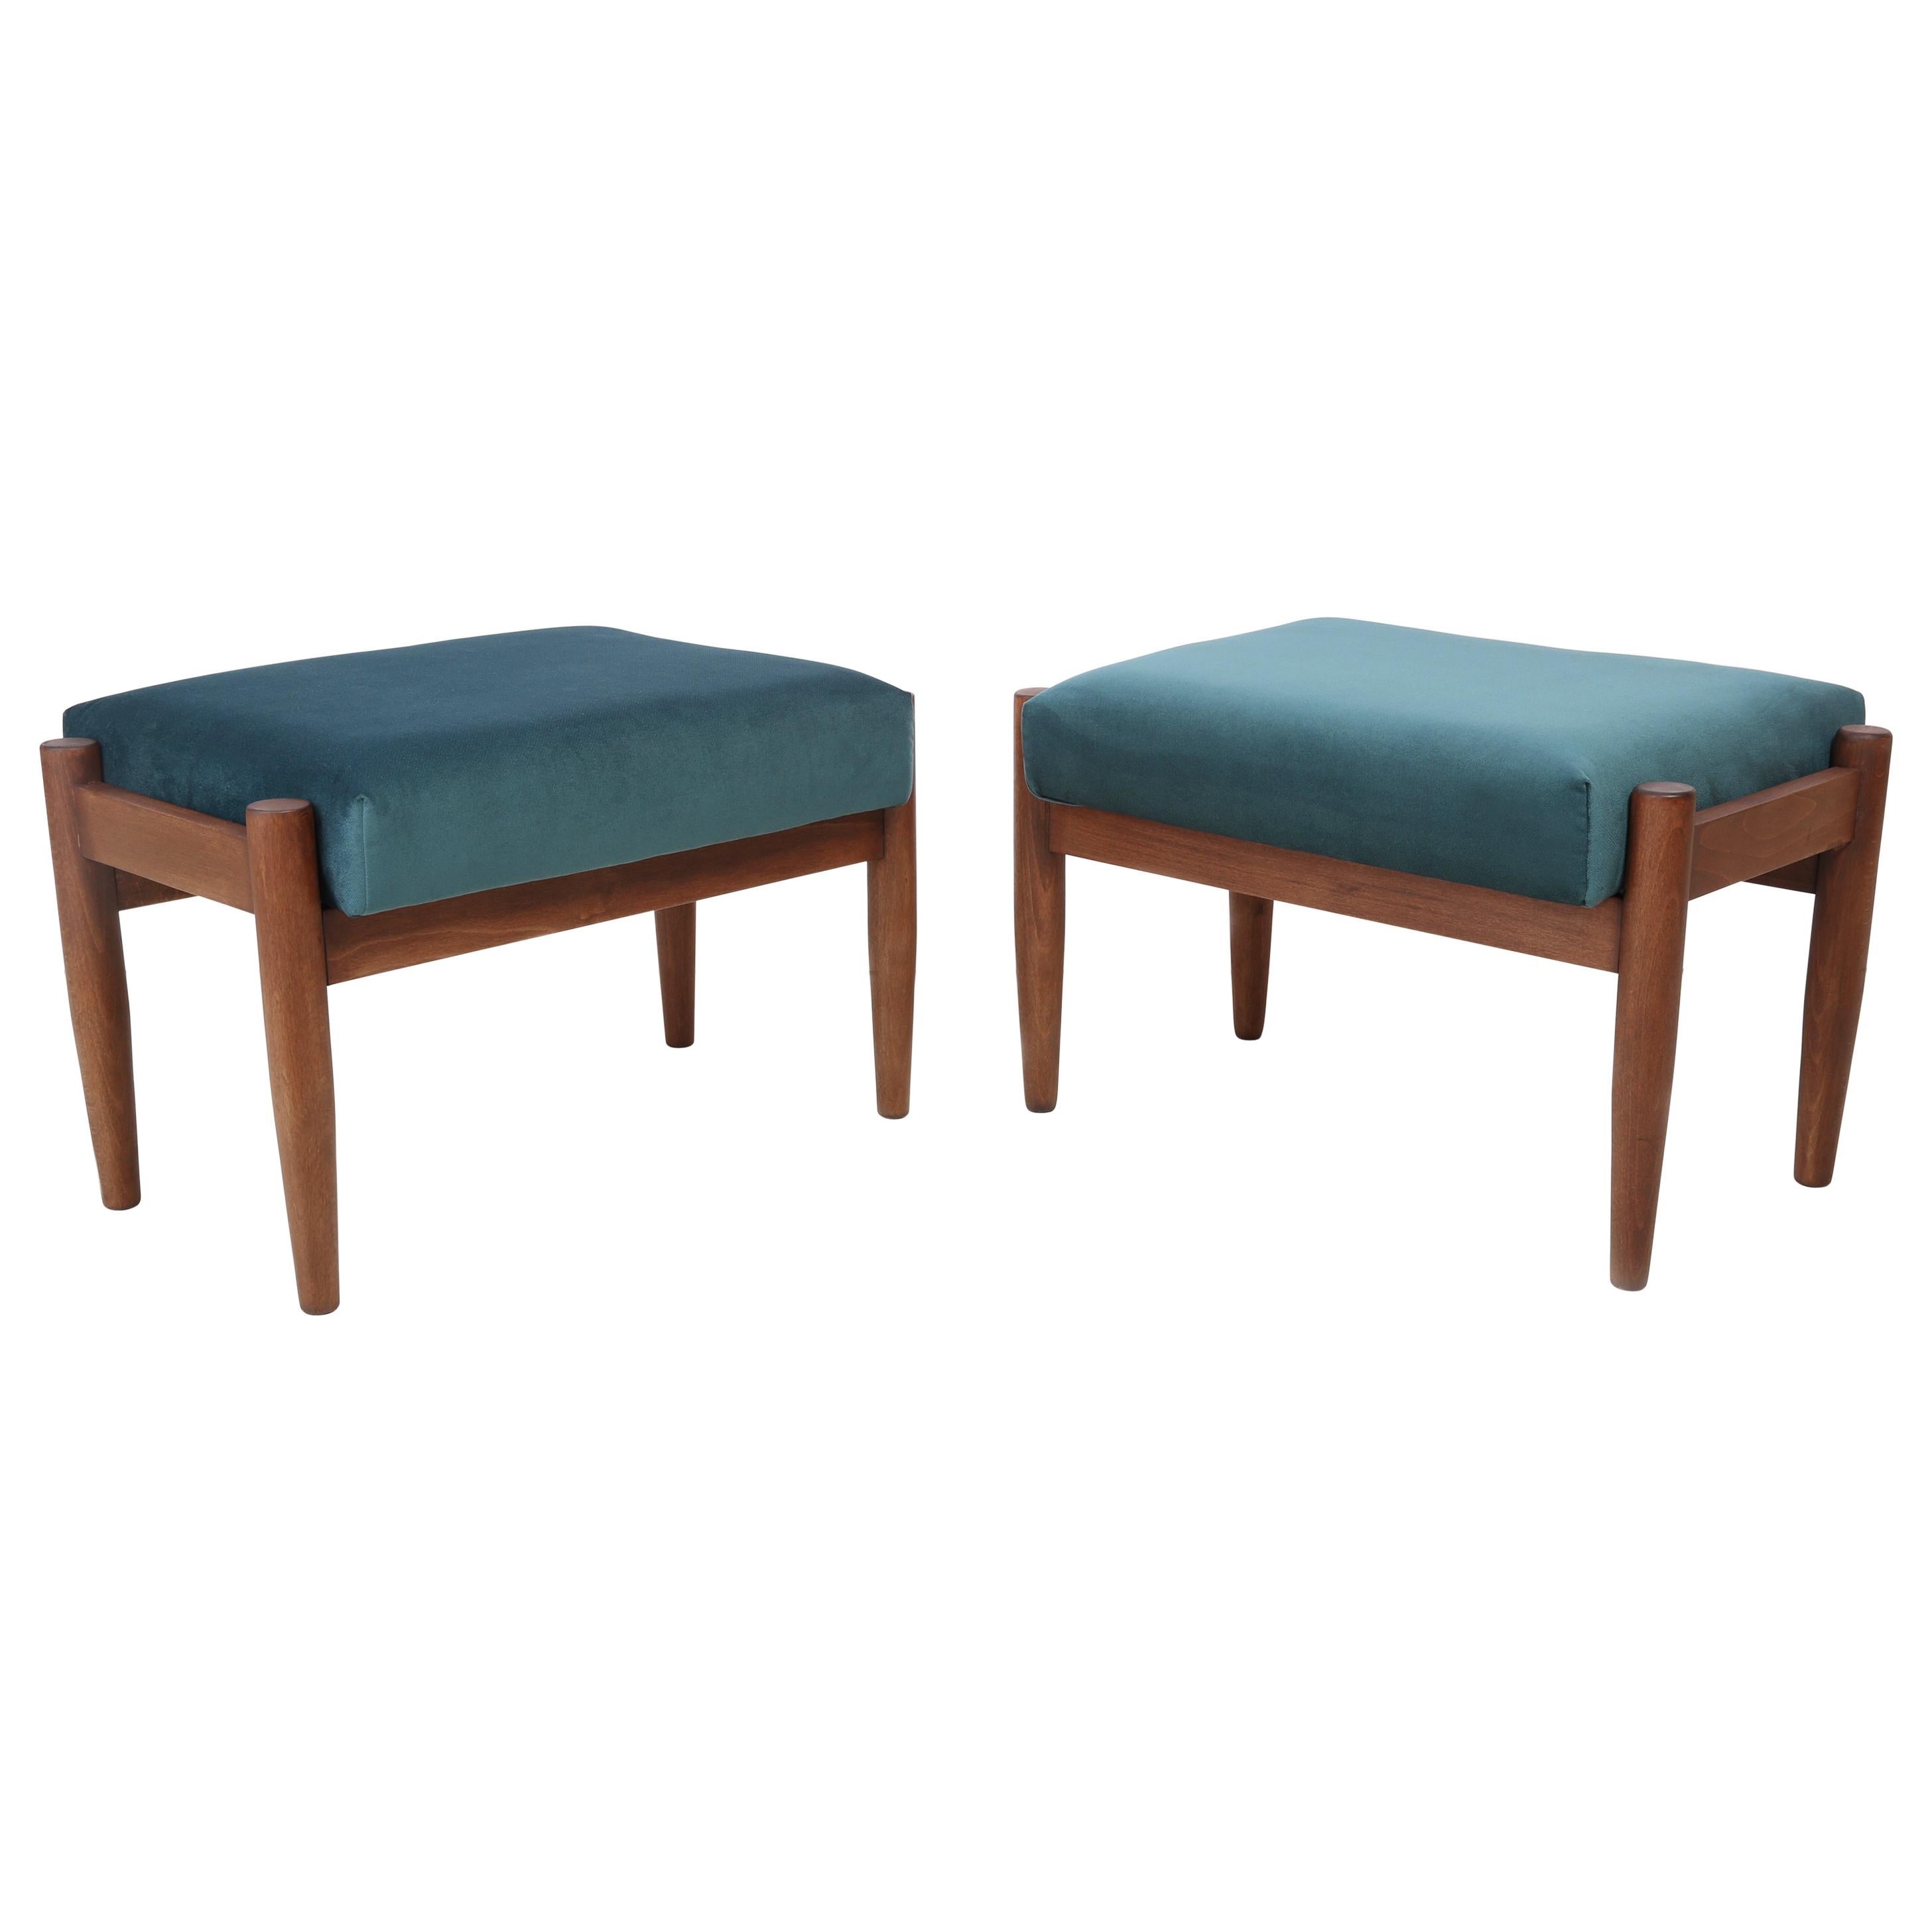 Pair of Two Petrol Blue Vintage Stools, Edmund Homa, 1960s For Sale